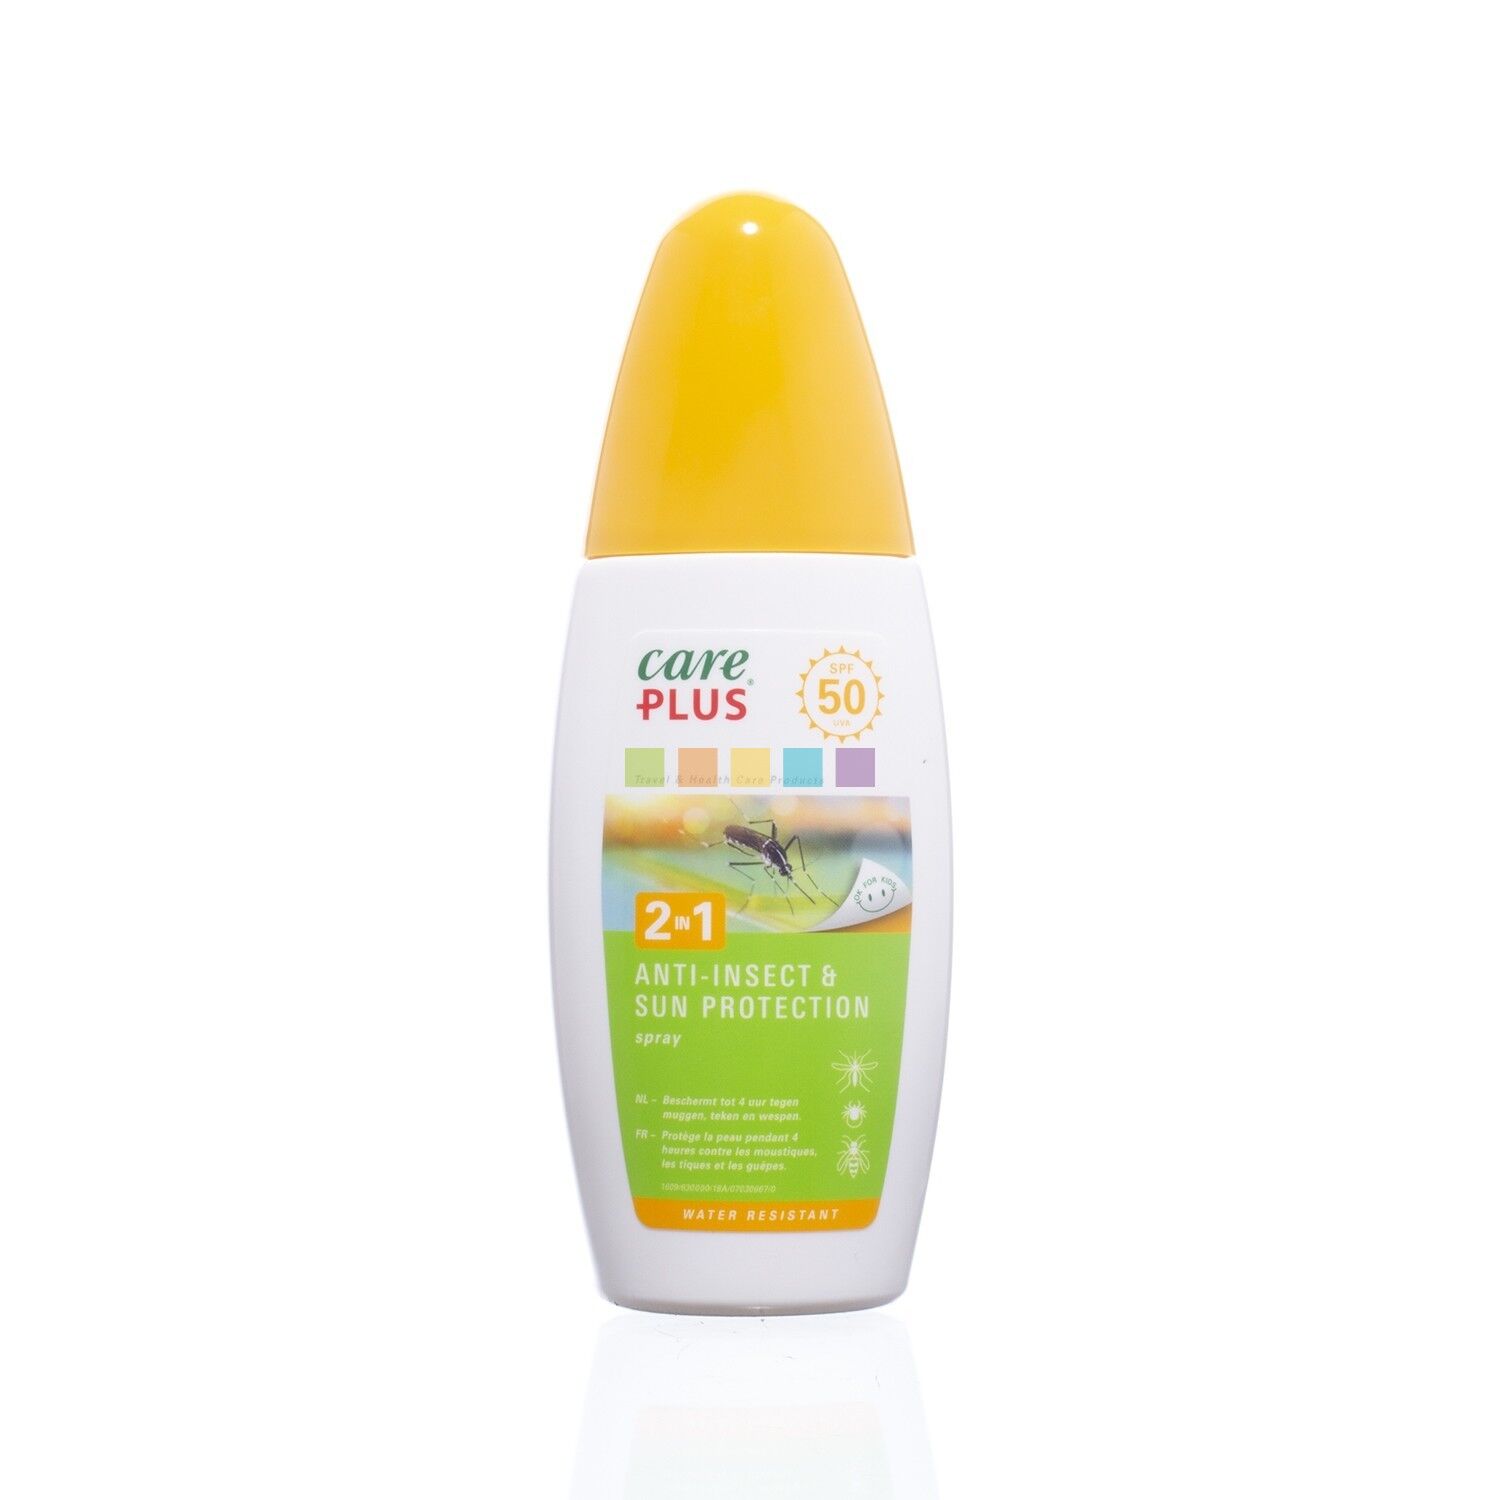 Care Plus 2in1 Anti-Insect & Sun Protection Spray SPF50 - Insect repellent